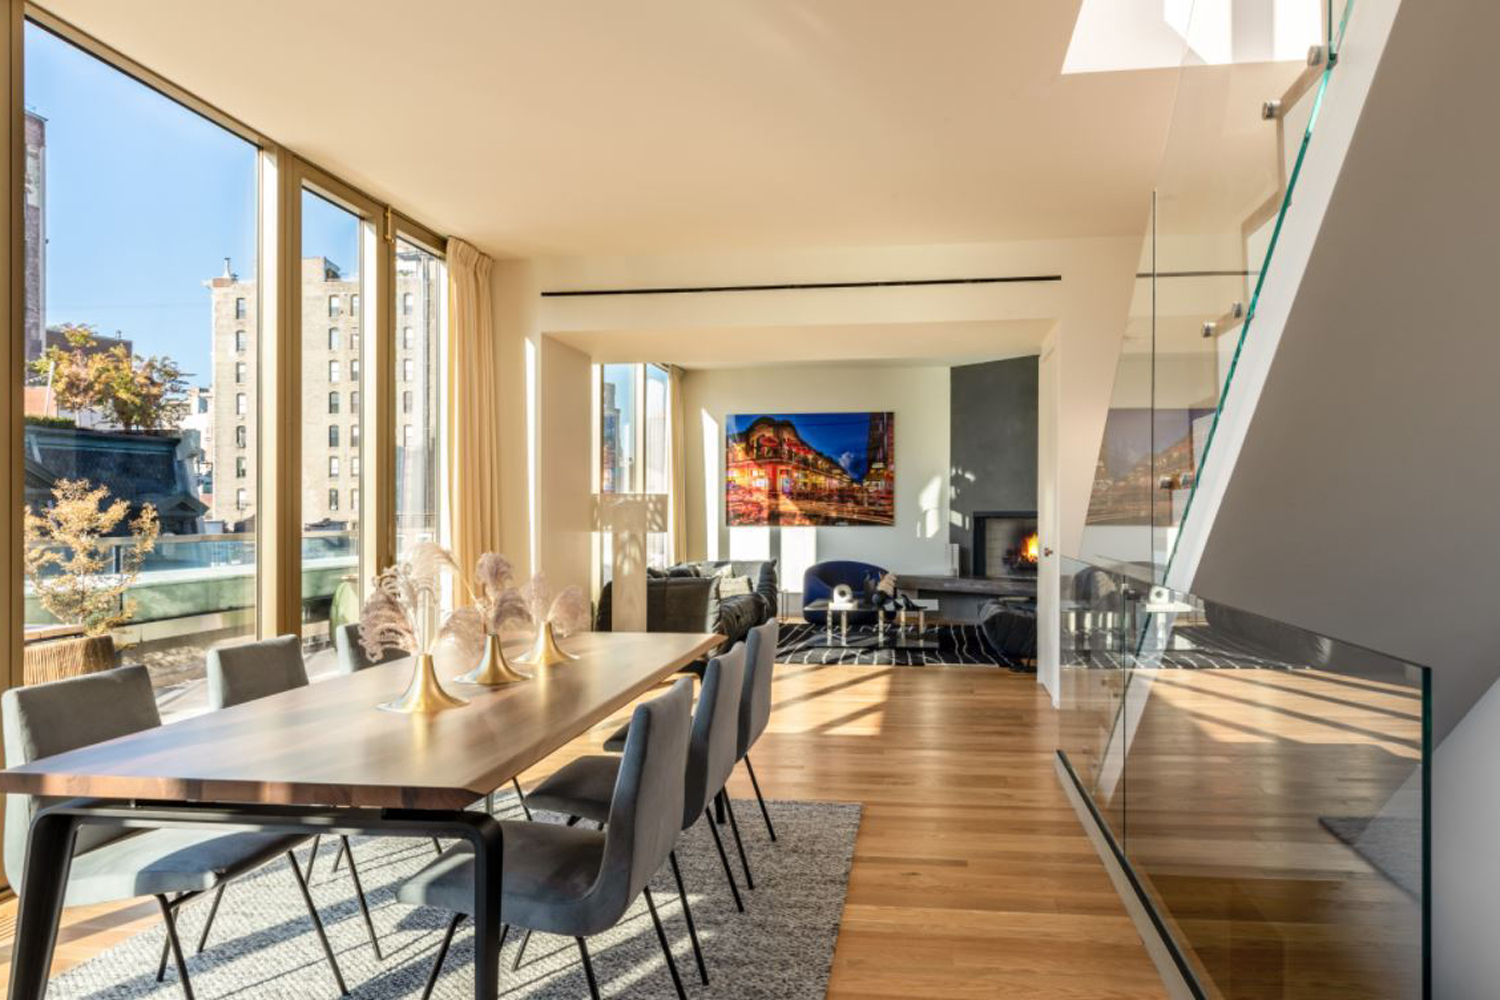 Look inside the New York City penthouse that's part of a luxury condo